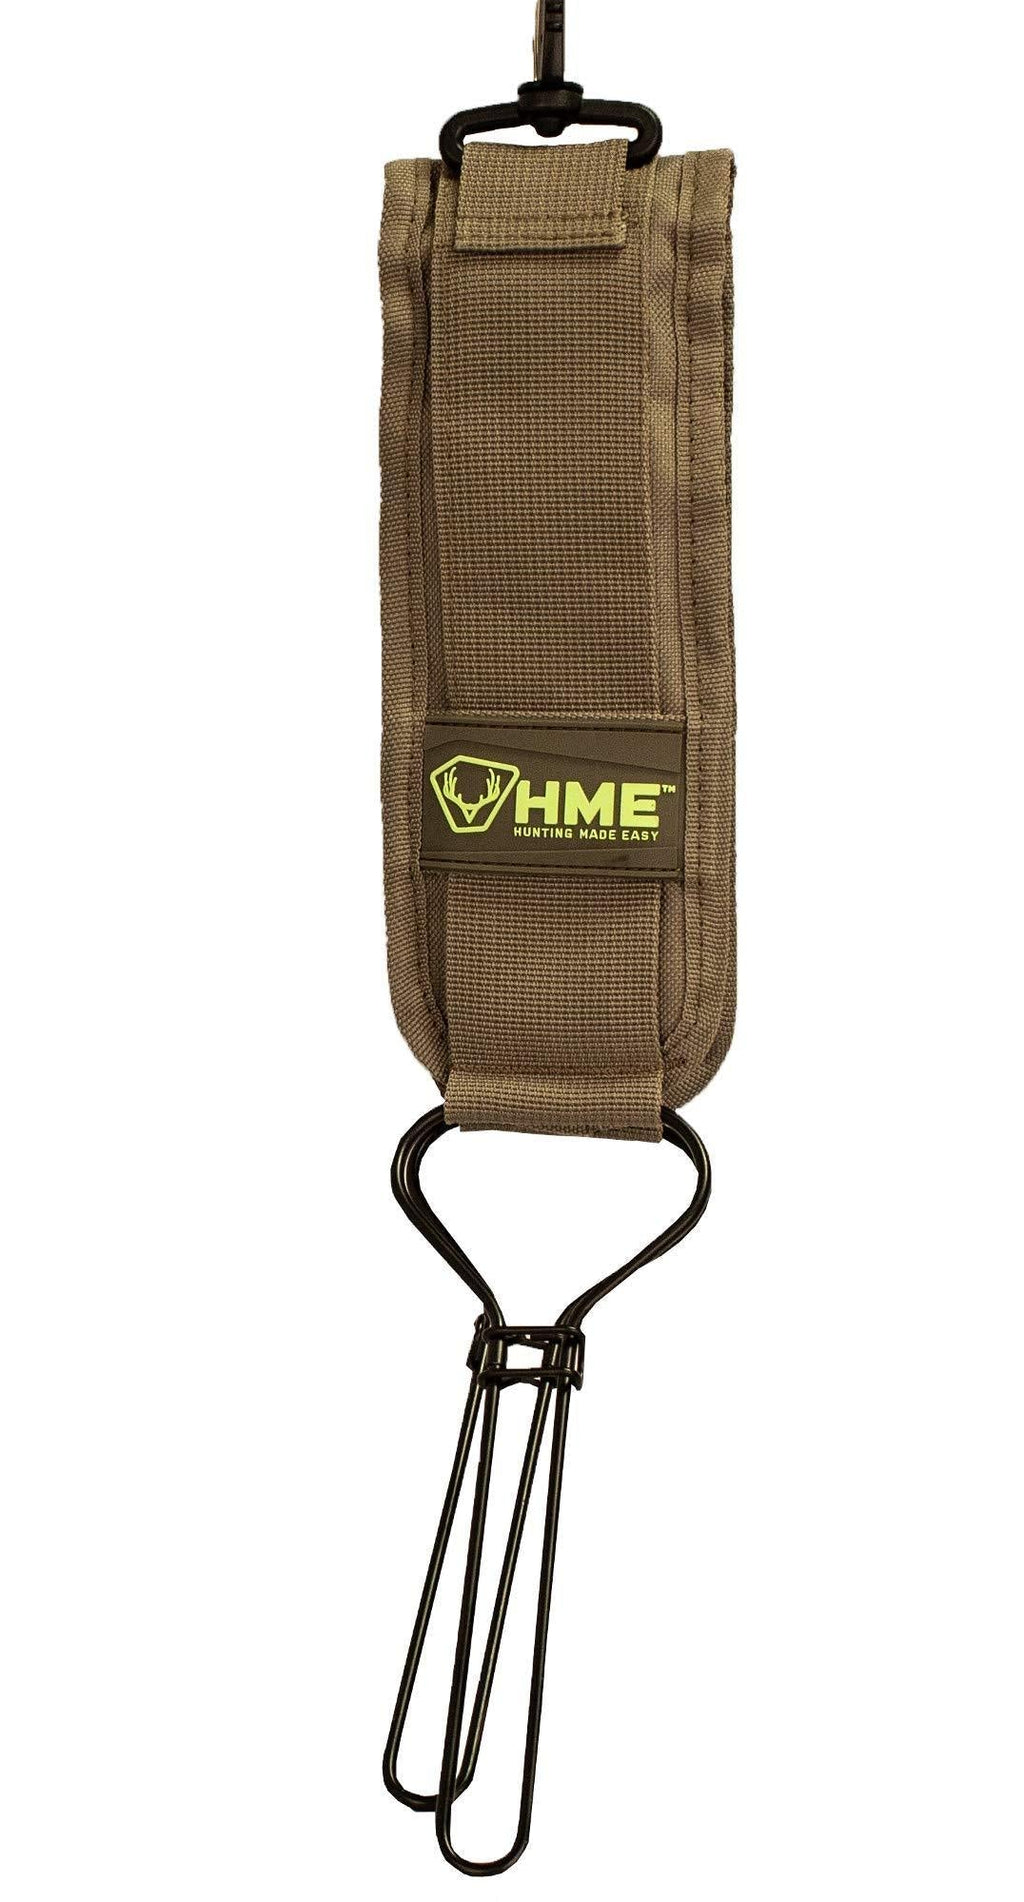 [AUSTRALIA] - Hunting Made Easy HME-GTMR Hunting Accessories Game Bags 